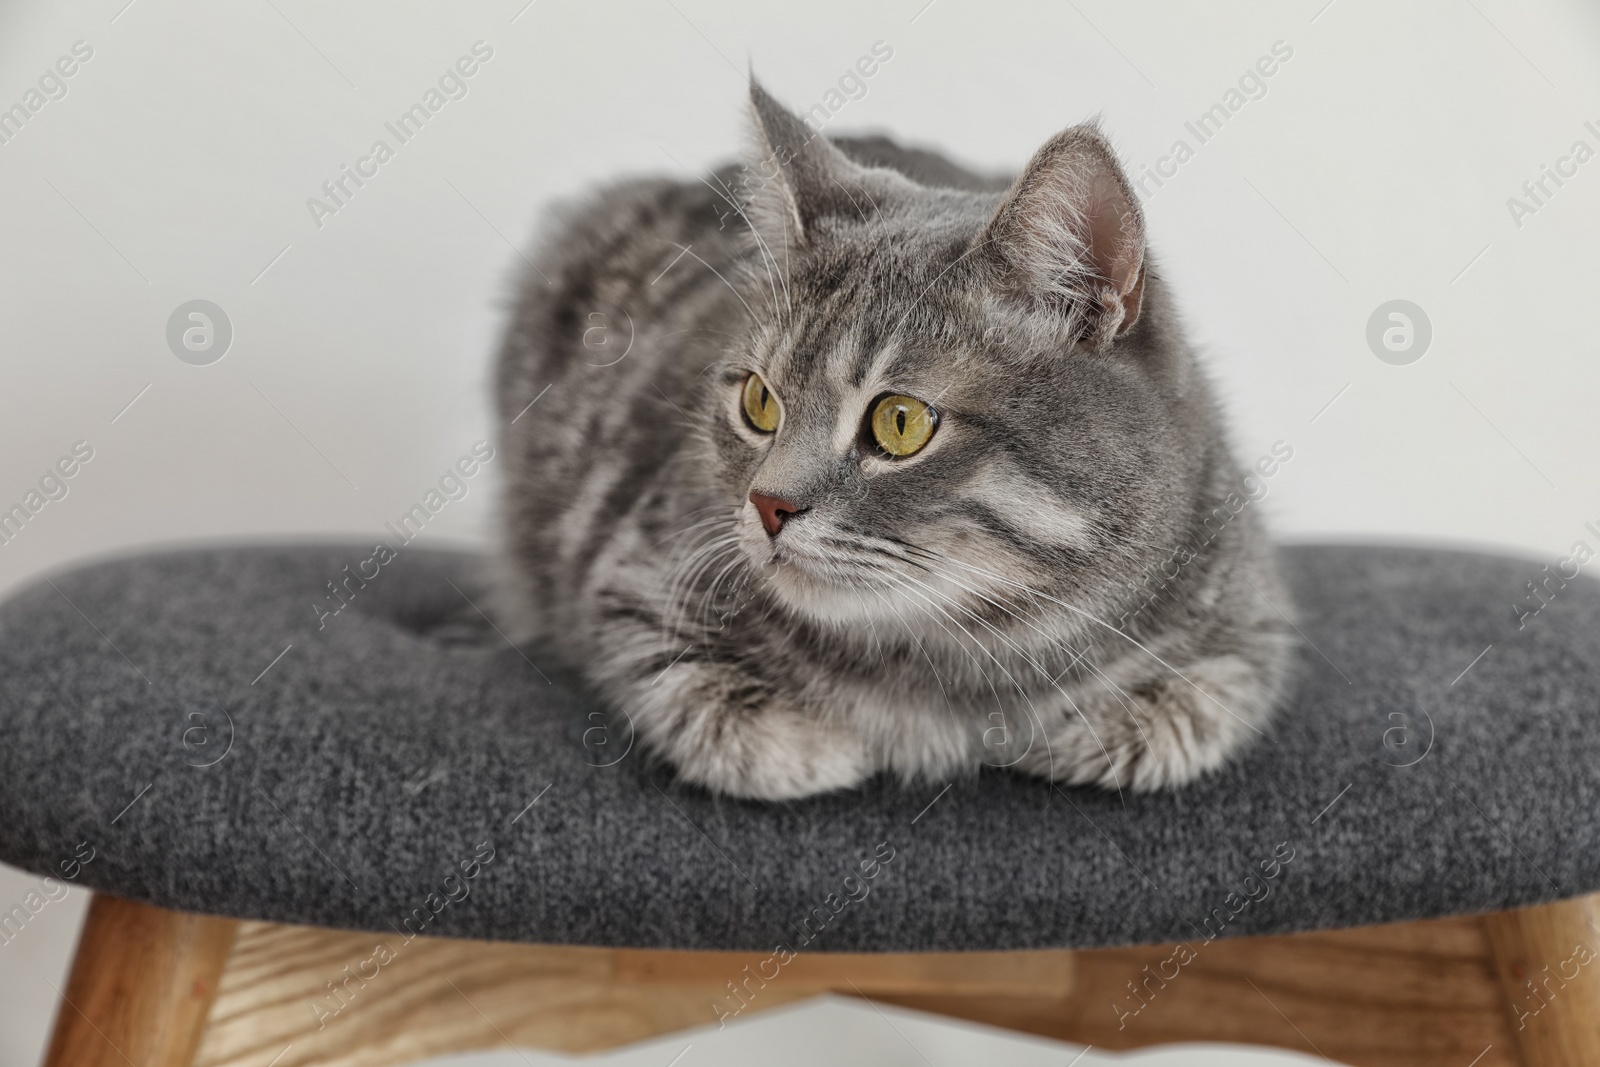 Photo of Adorable grey tabby cat on stool against light background